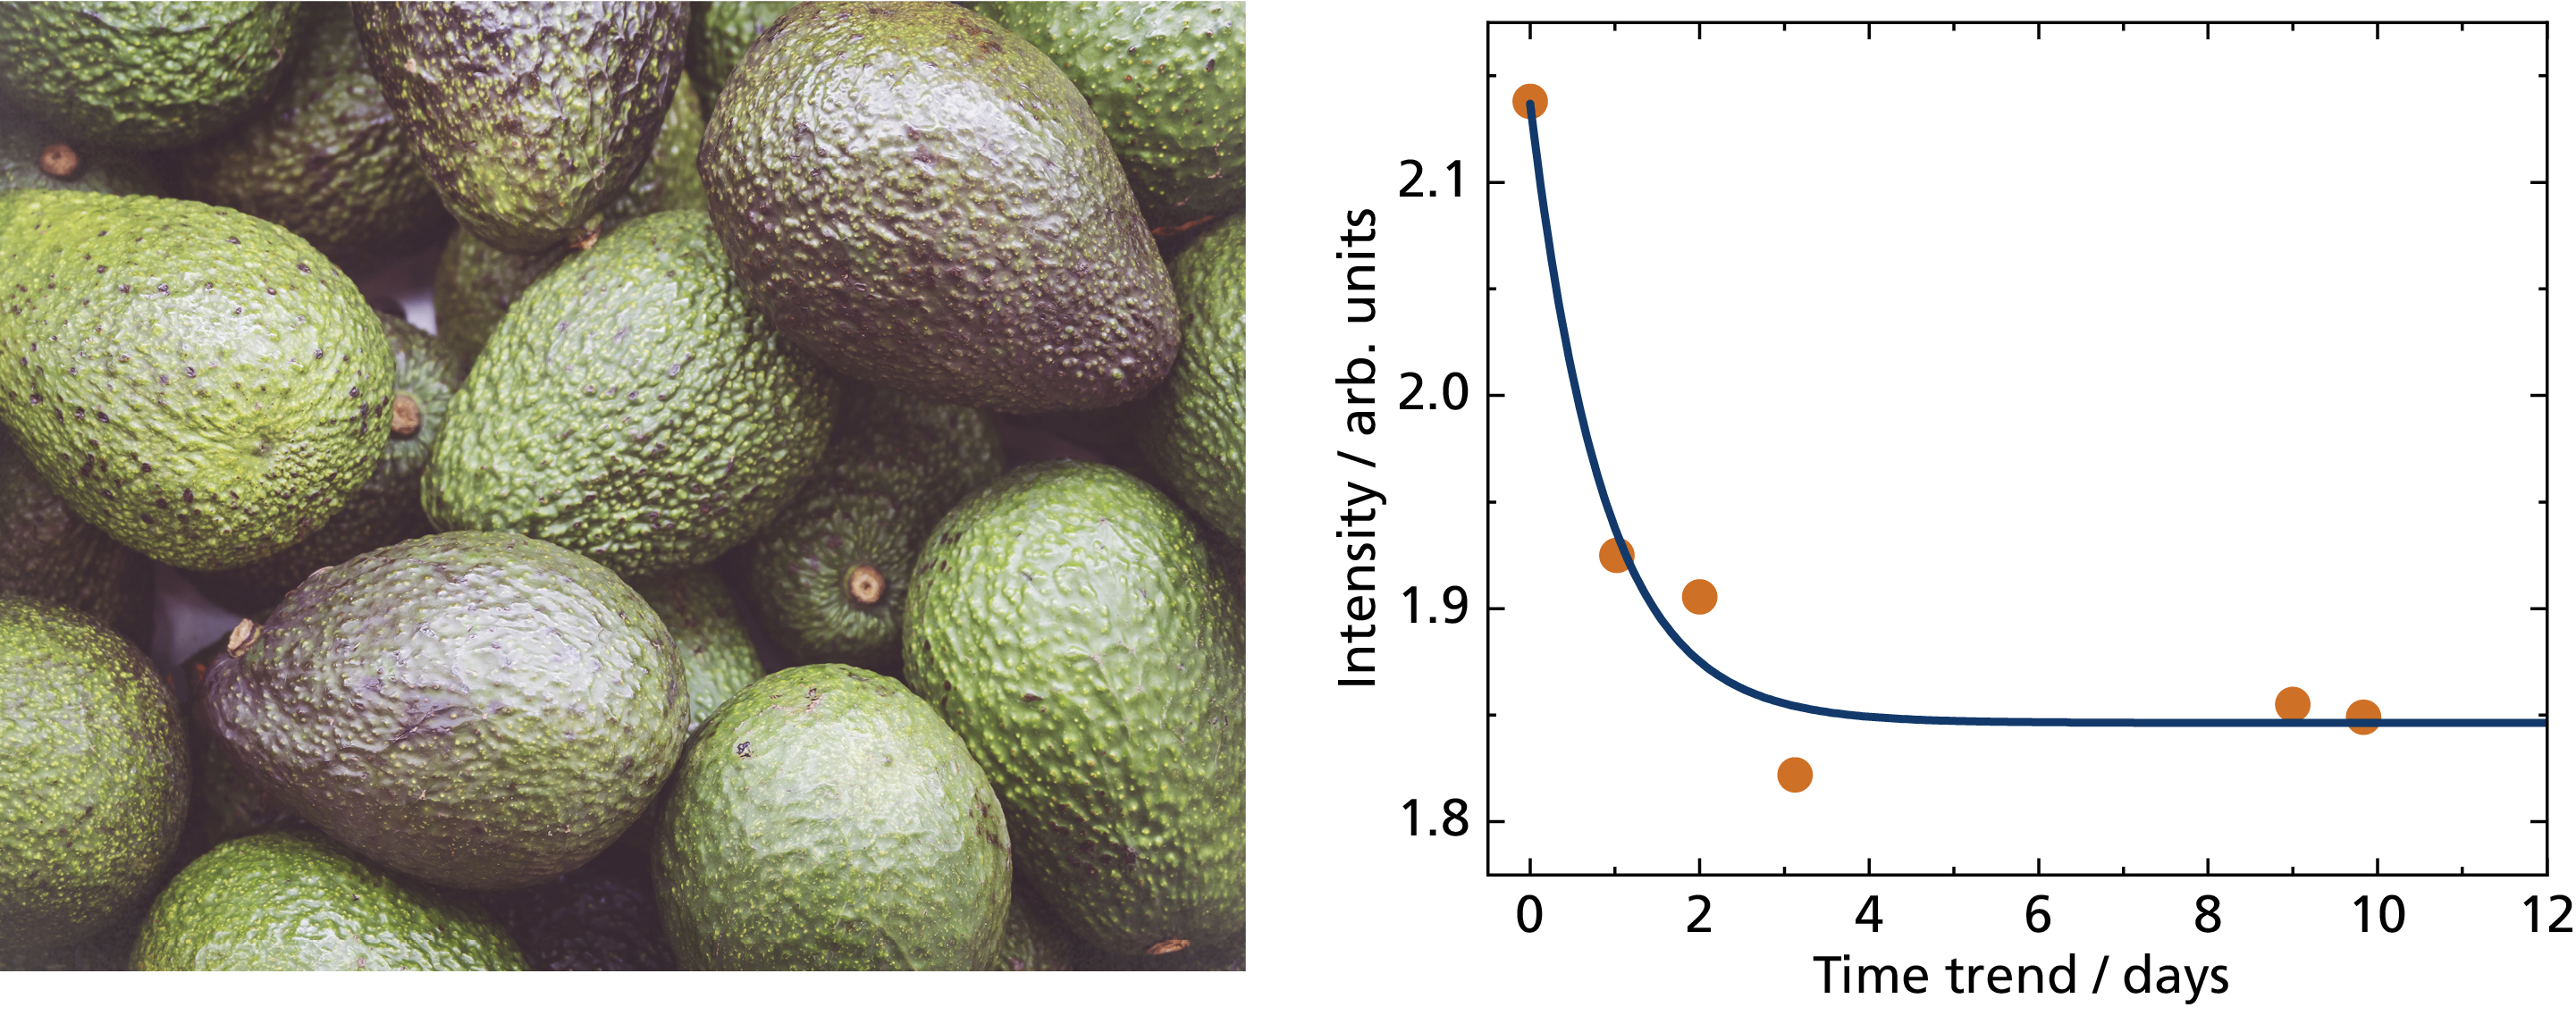 The example shows the changed spectral response of an avocado during the ripening process.